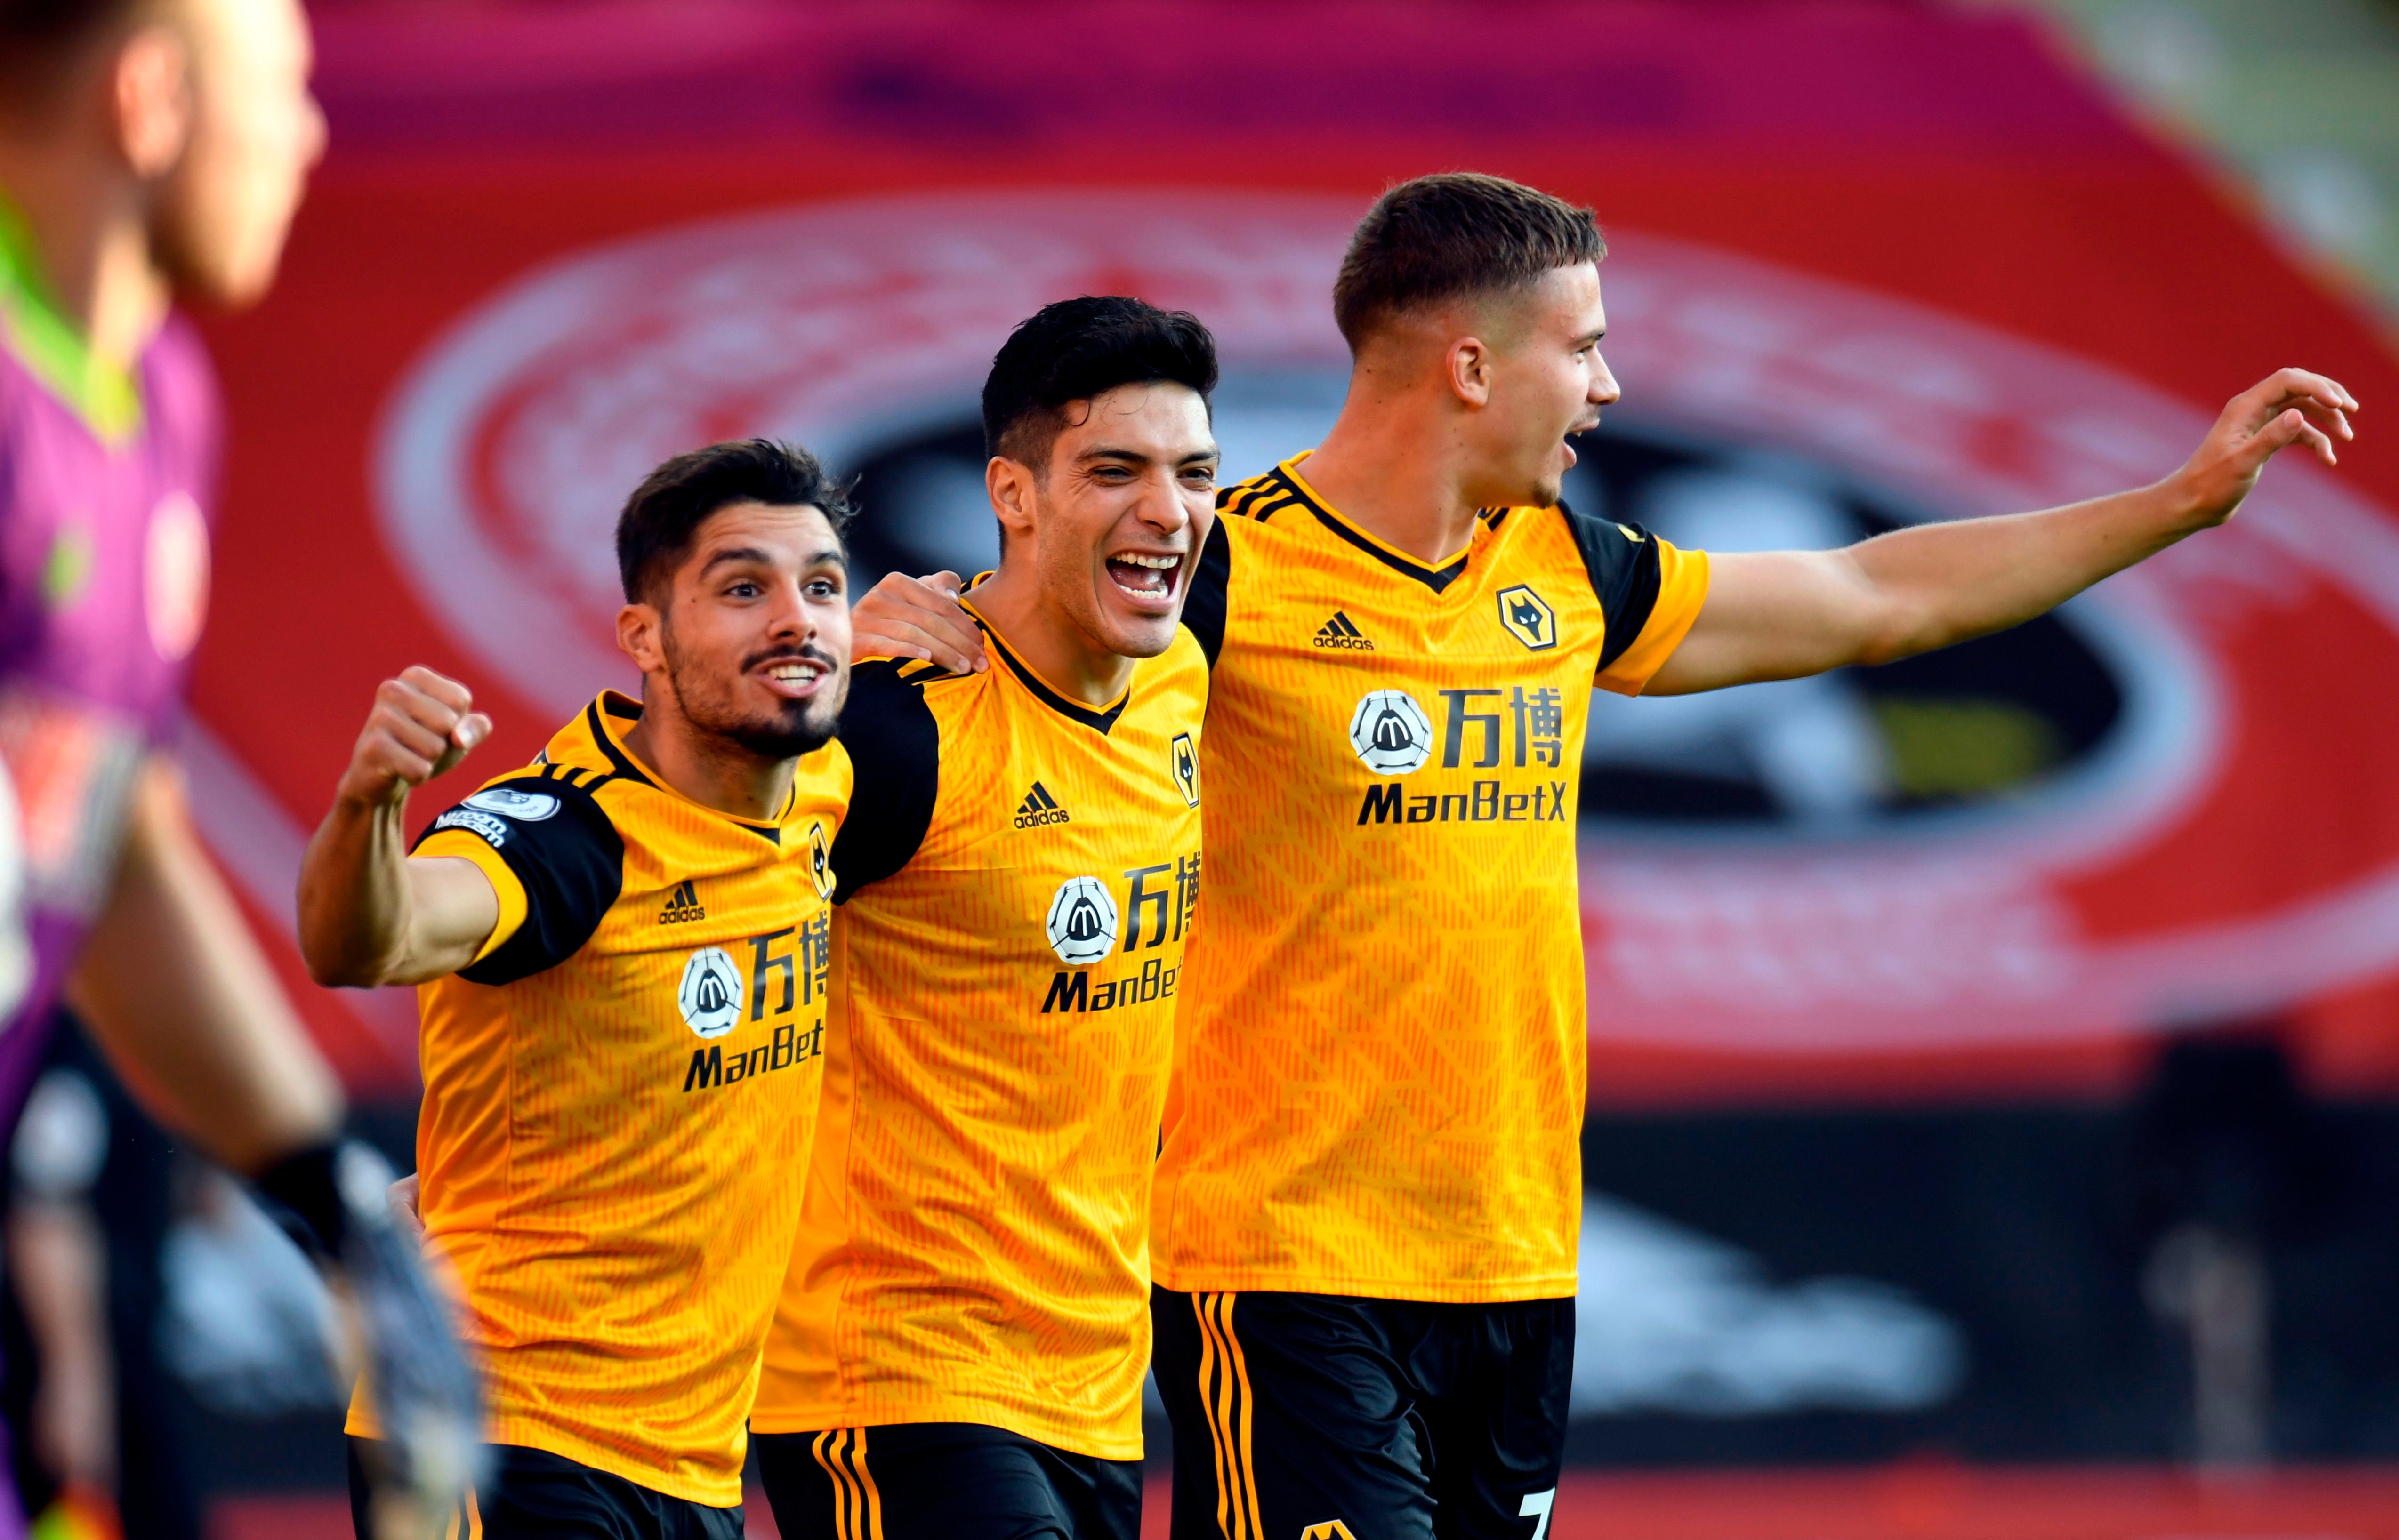 Sheffield United vs Wolves LIVE Result, final score and reaction today